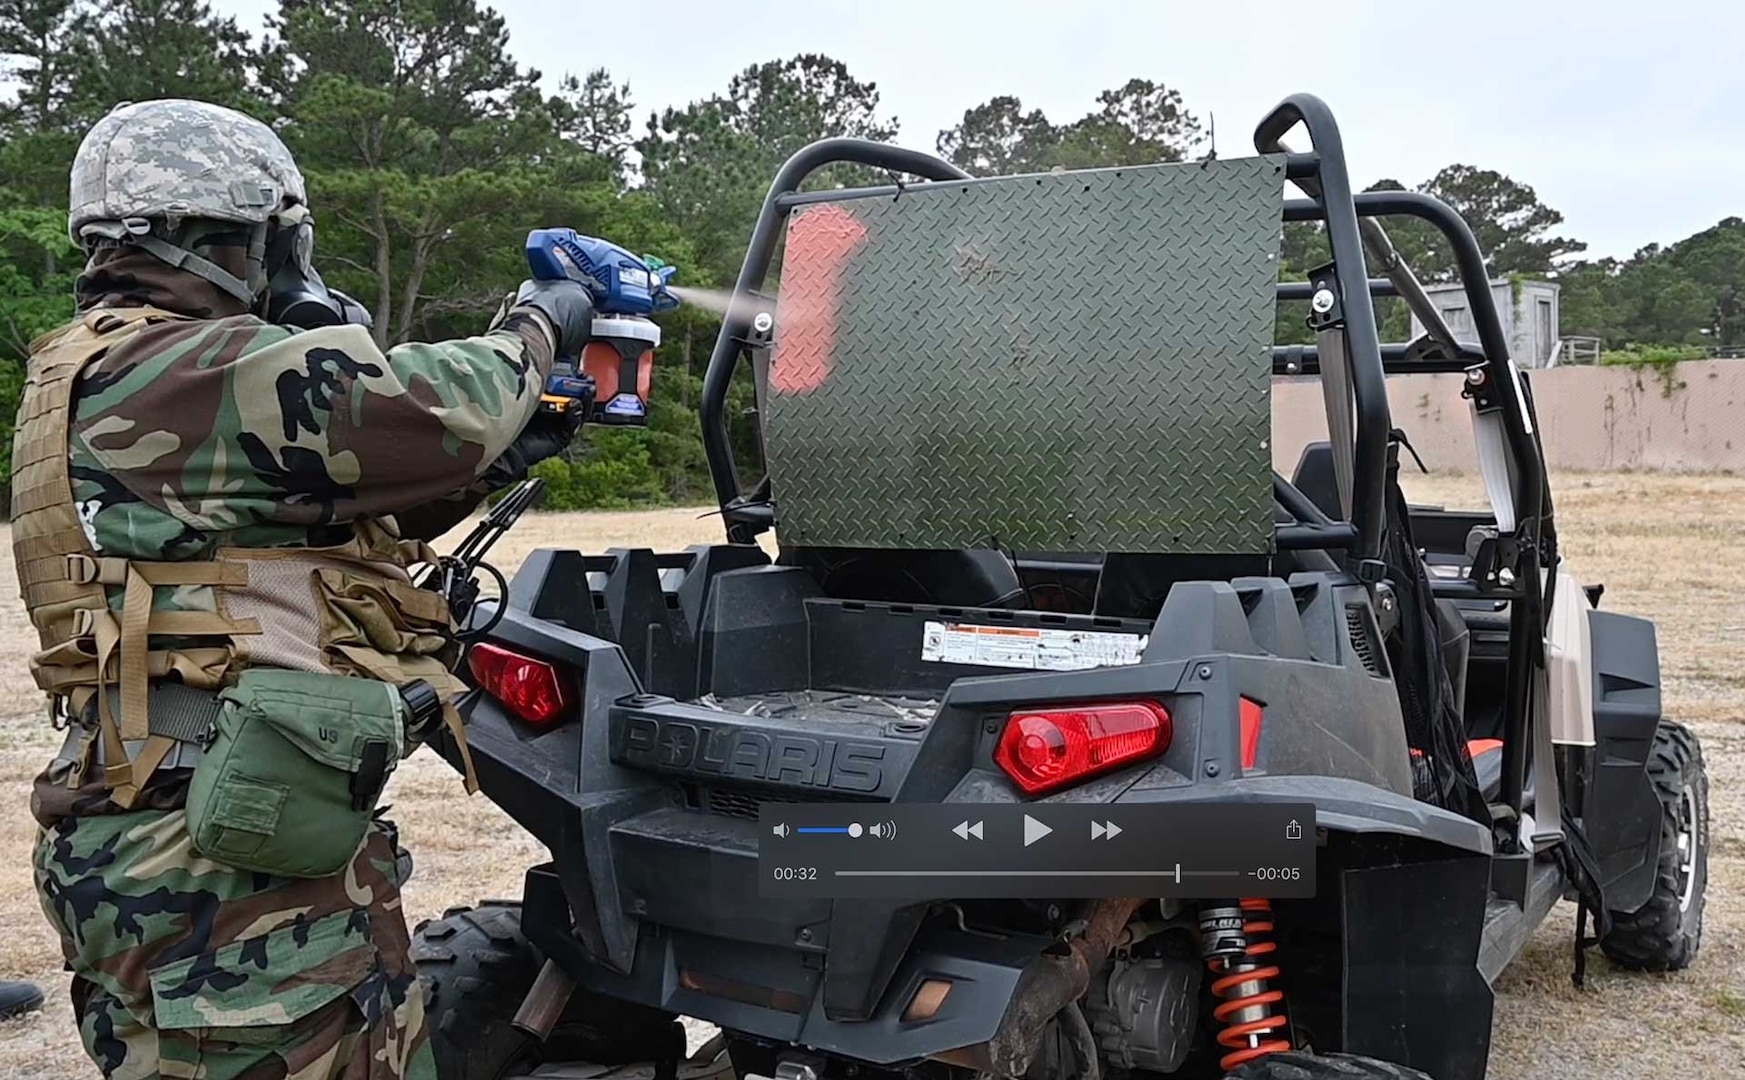 Uniformed personnel representing the U.S. Joint Forces, participated in the Defense Threat Reduction Agency’s (DTRA), 2021 Chemical and Biological Operational Analysis (CBOA) at the Joint Expeditionary Base Little Creek – Fort Story, Va., from 24-28 May 2021.